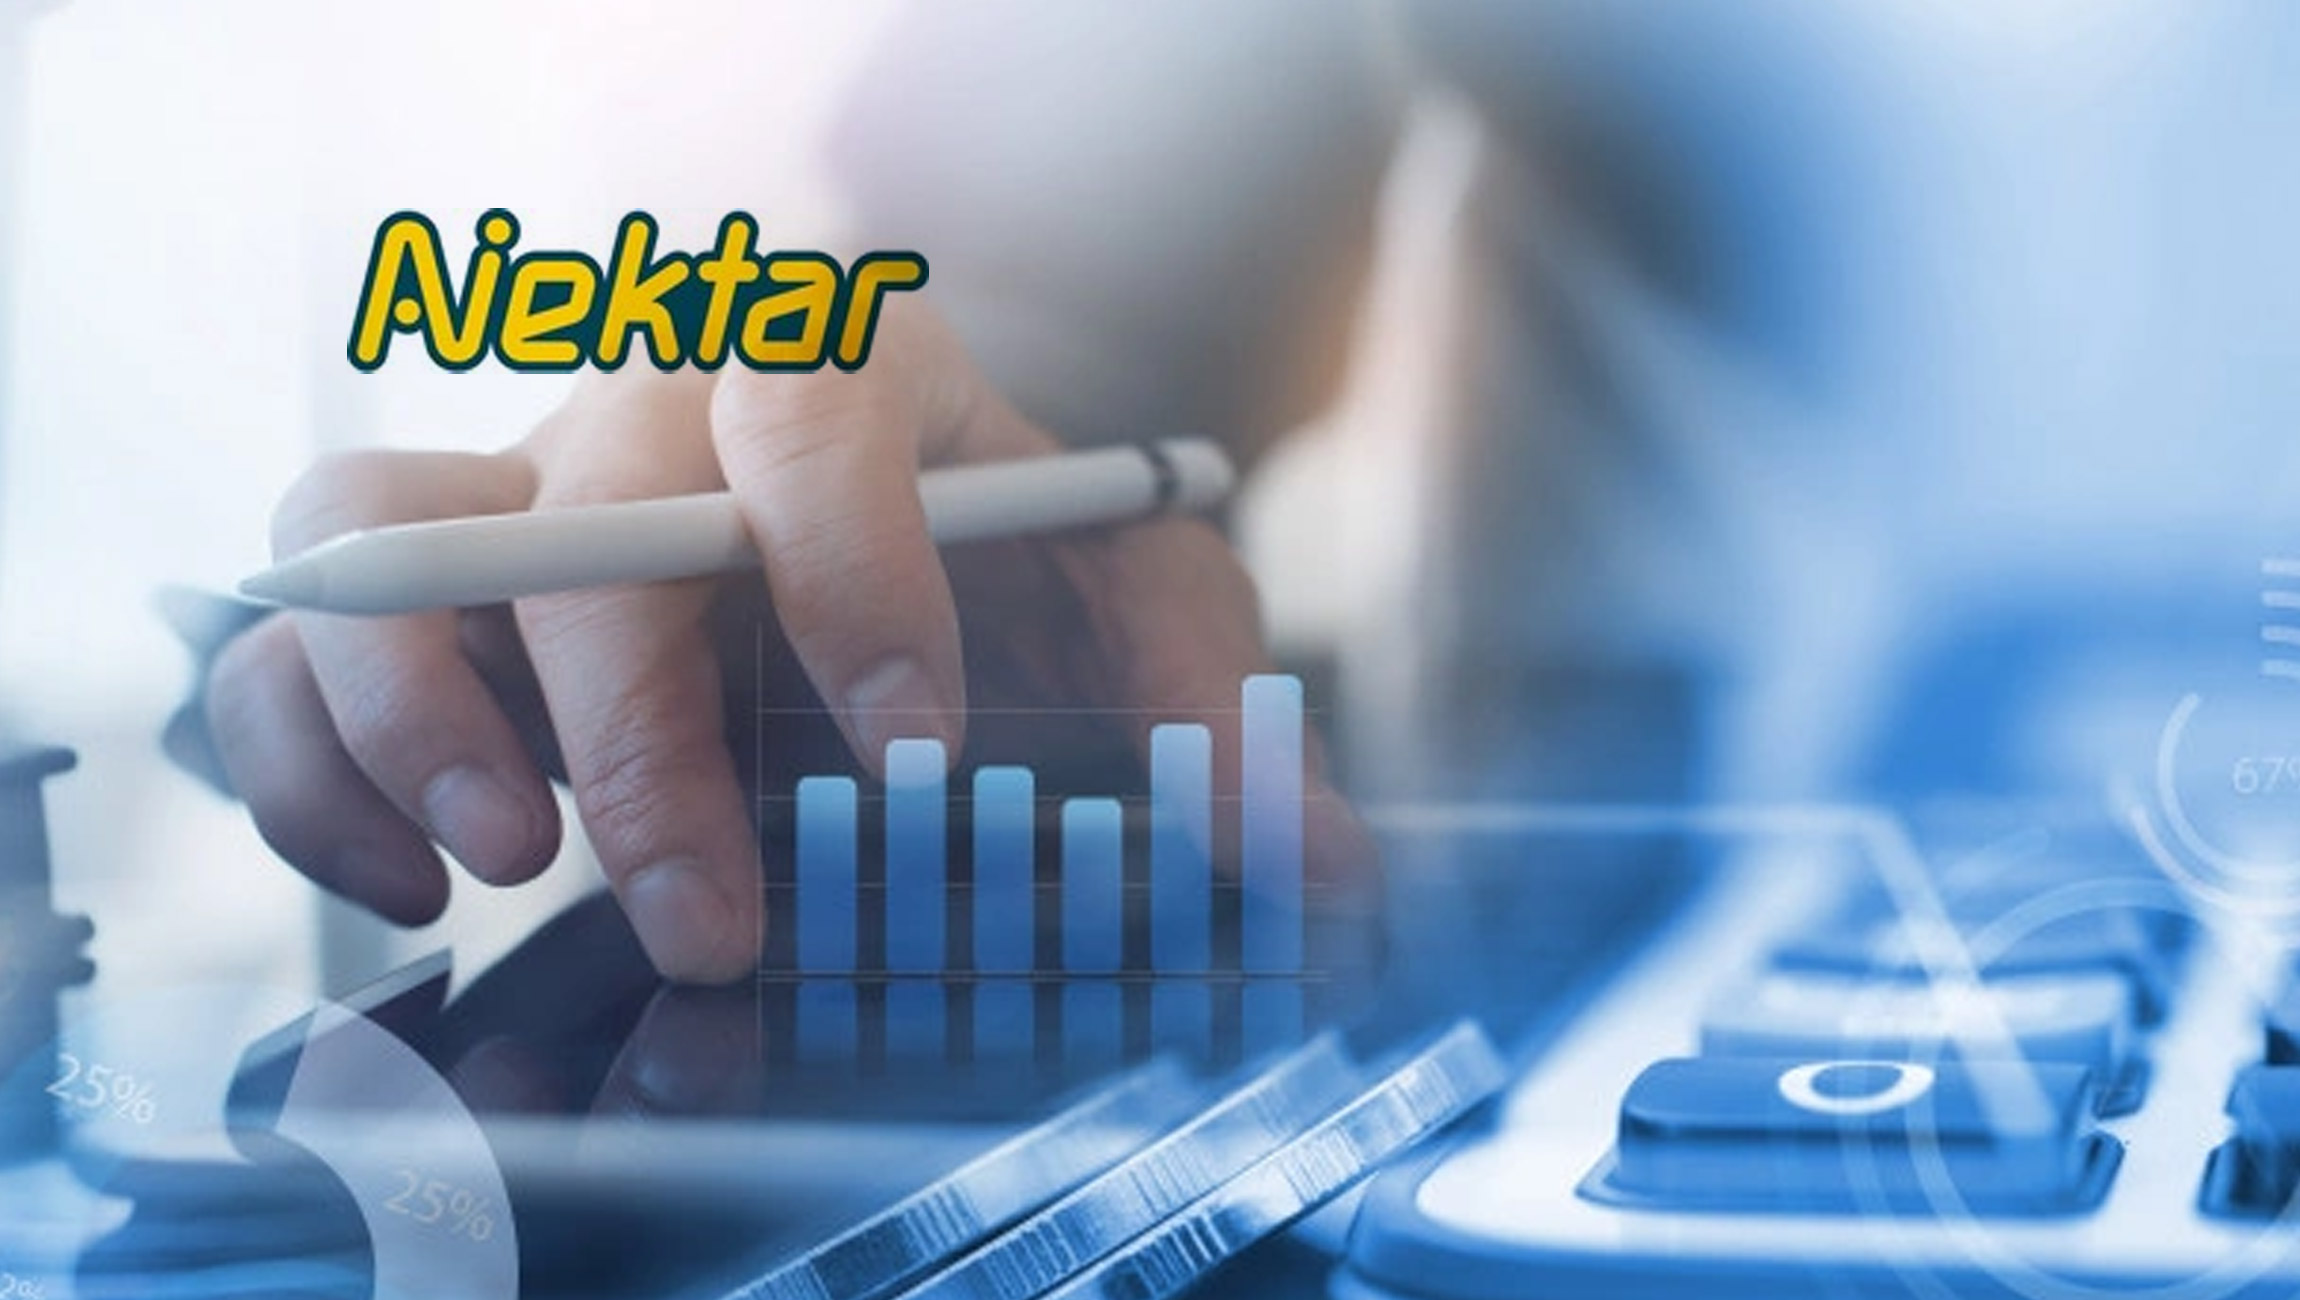 Nektar.ai Closes a Seed Round of US$8.1 Million as It Aims to Enable Data-Driven Smart Work for B2B SaaS Revenue Teams